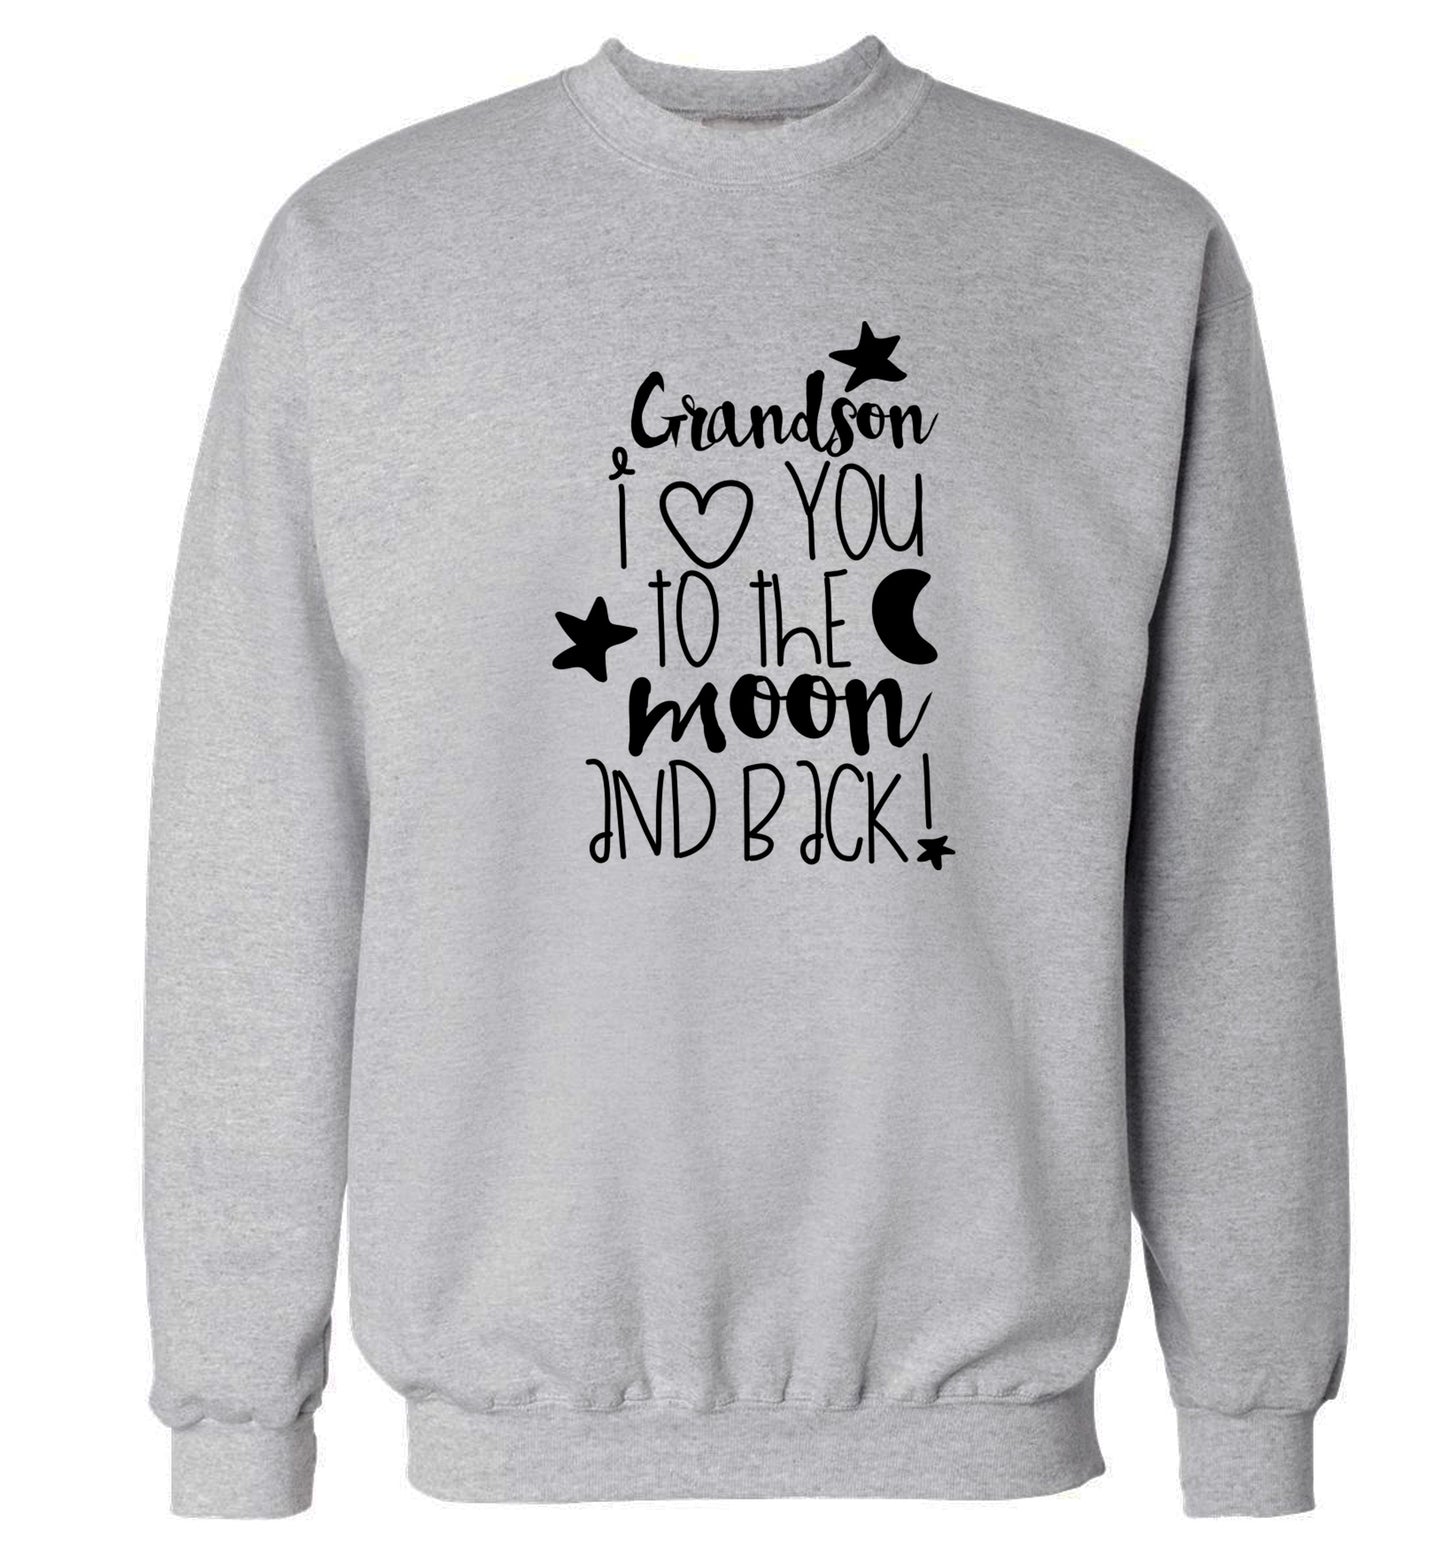 Grandson I love you to the moon and back Adult's unisex grey  sweater 2XL